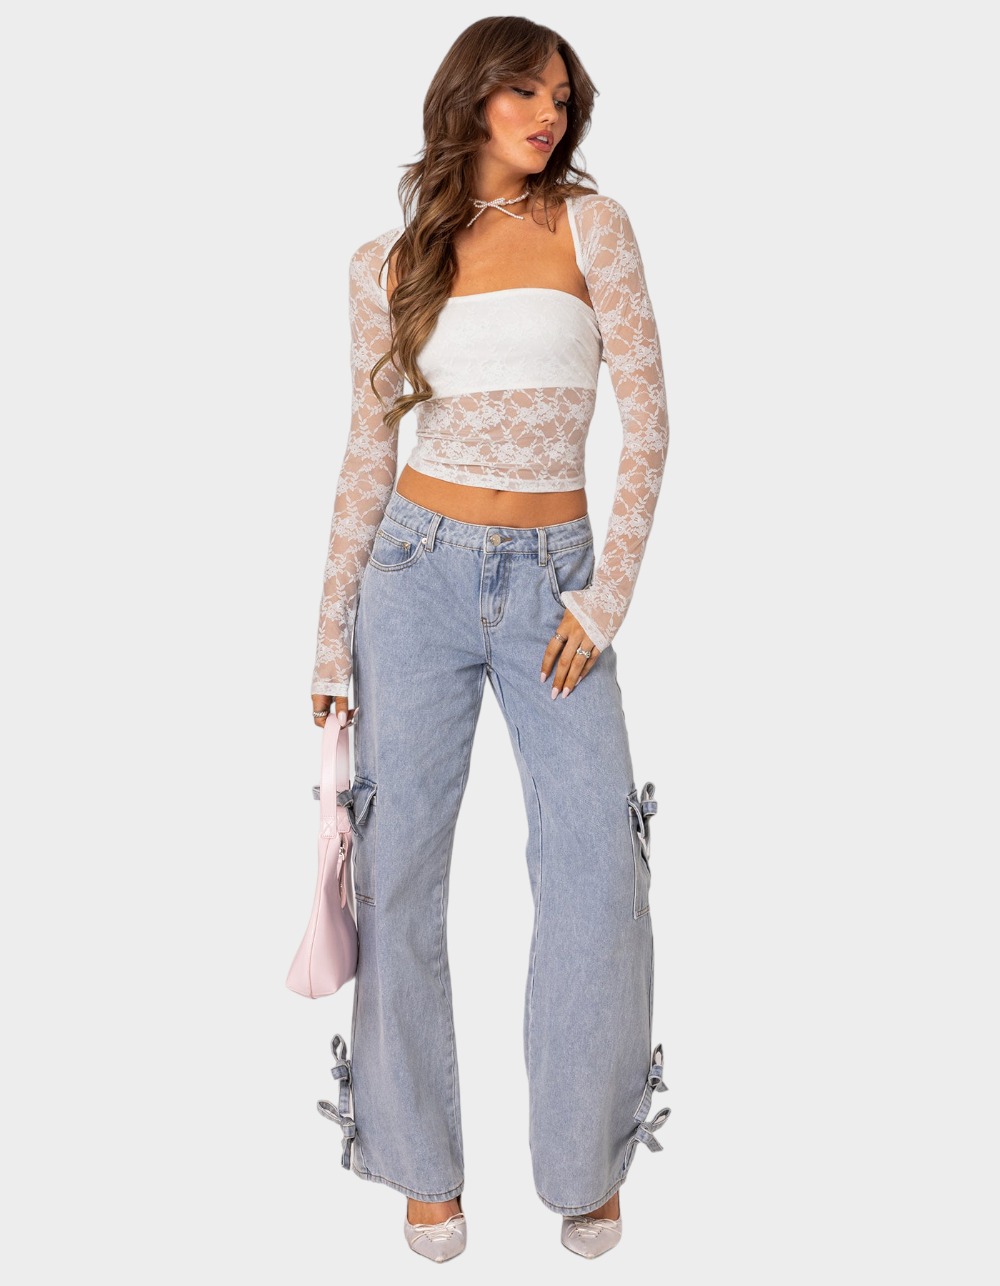 EDIKTED Addison Sheer Lace Two Piece Top - WHITE | Tillys